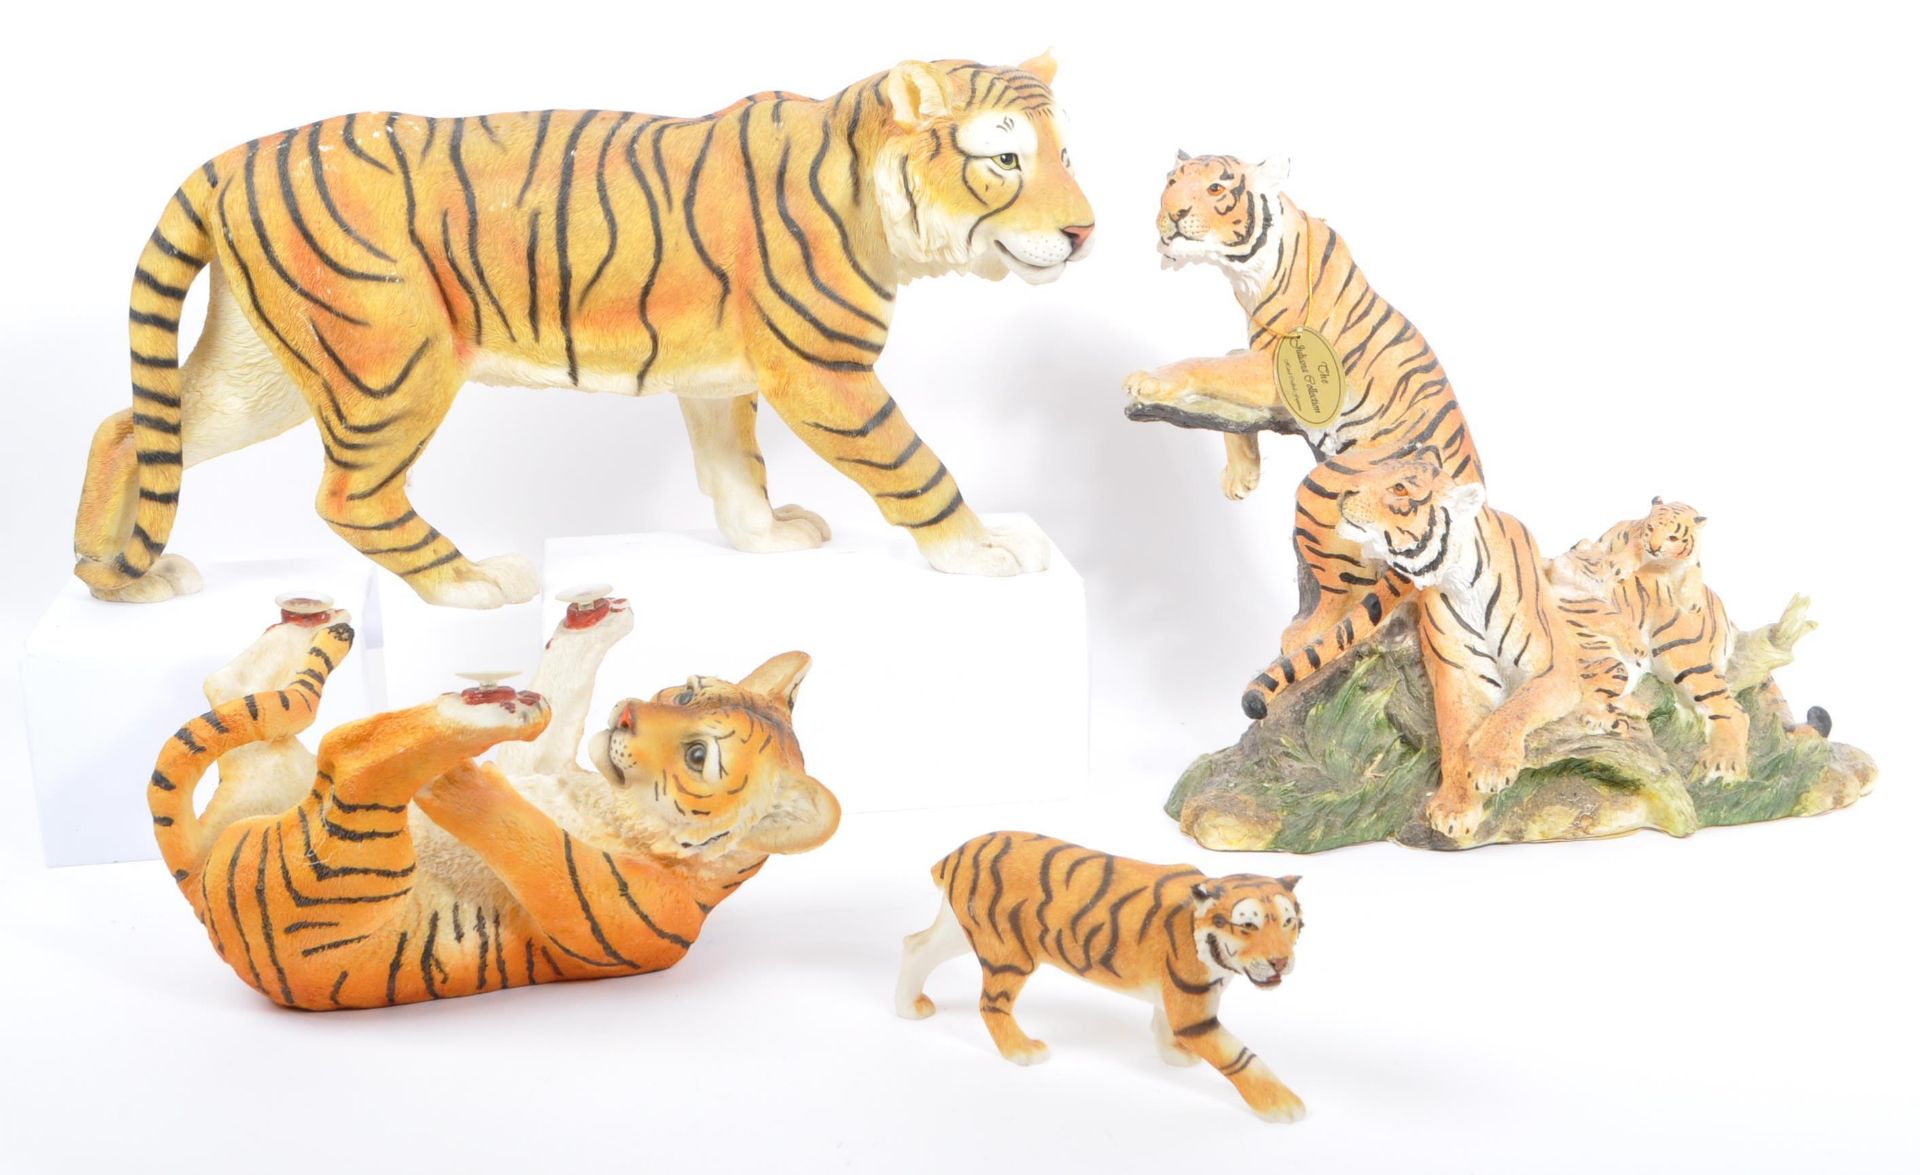 COLLECTION OF OF RESIN TIGER FIGURINES BY THE JULIANA COLLECTION